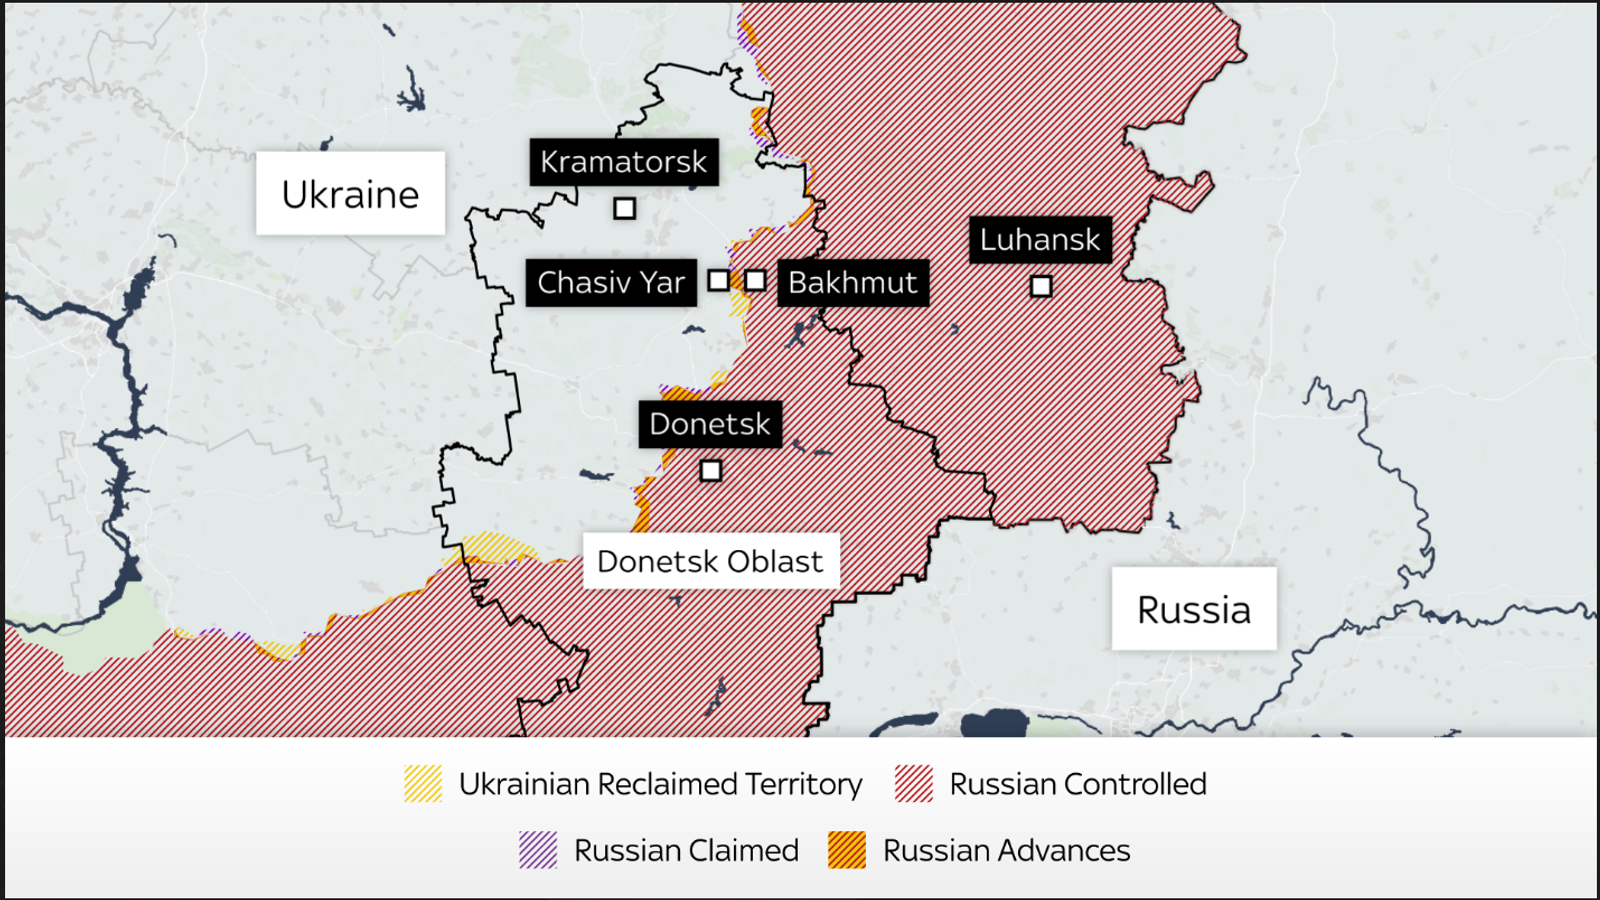 russia will push into heart of ukraine if it captures frontline town, governor warns